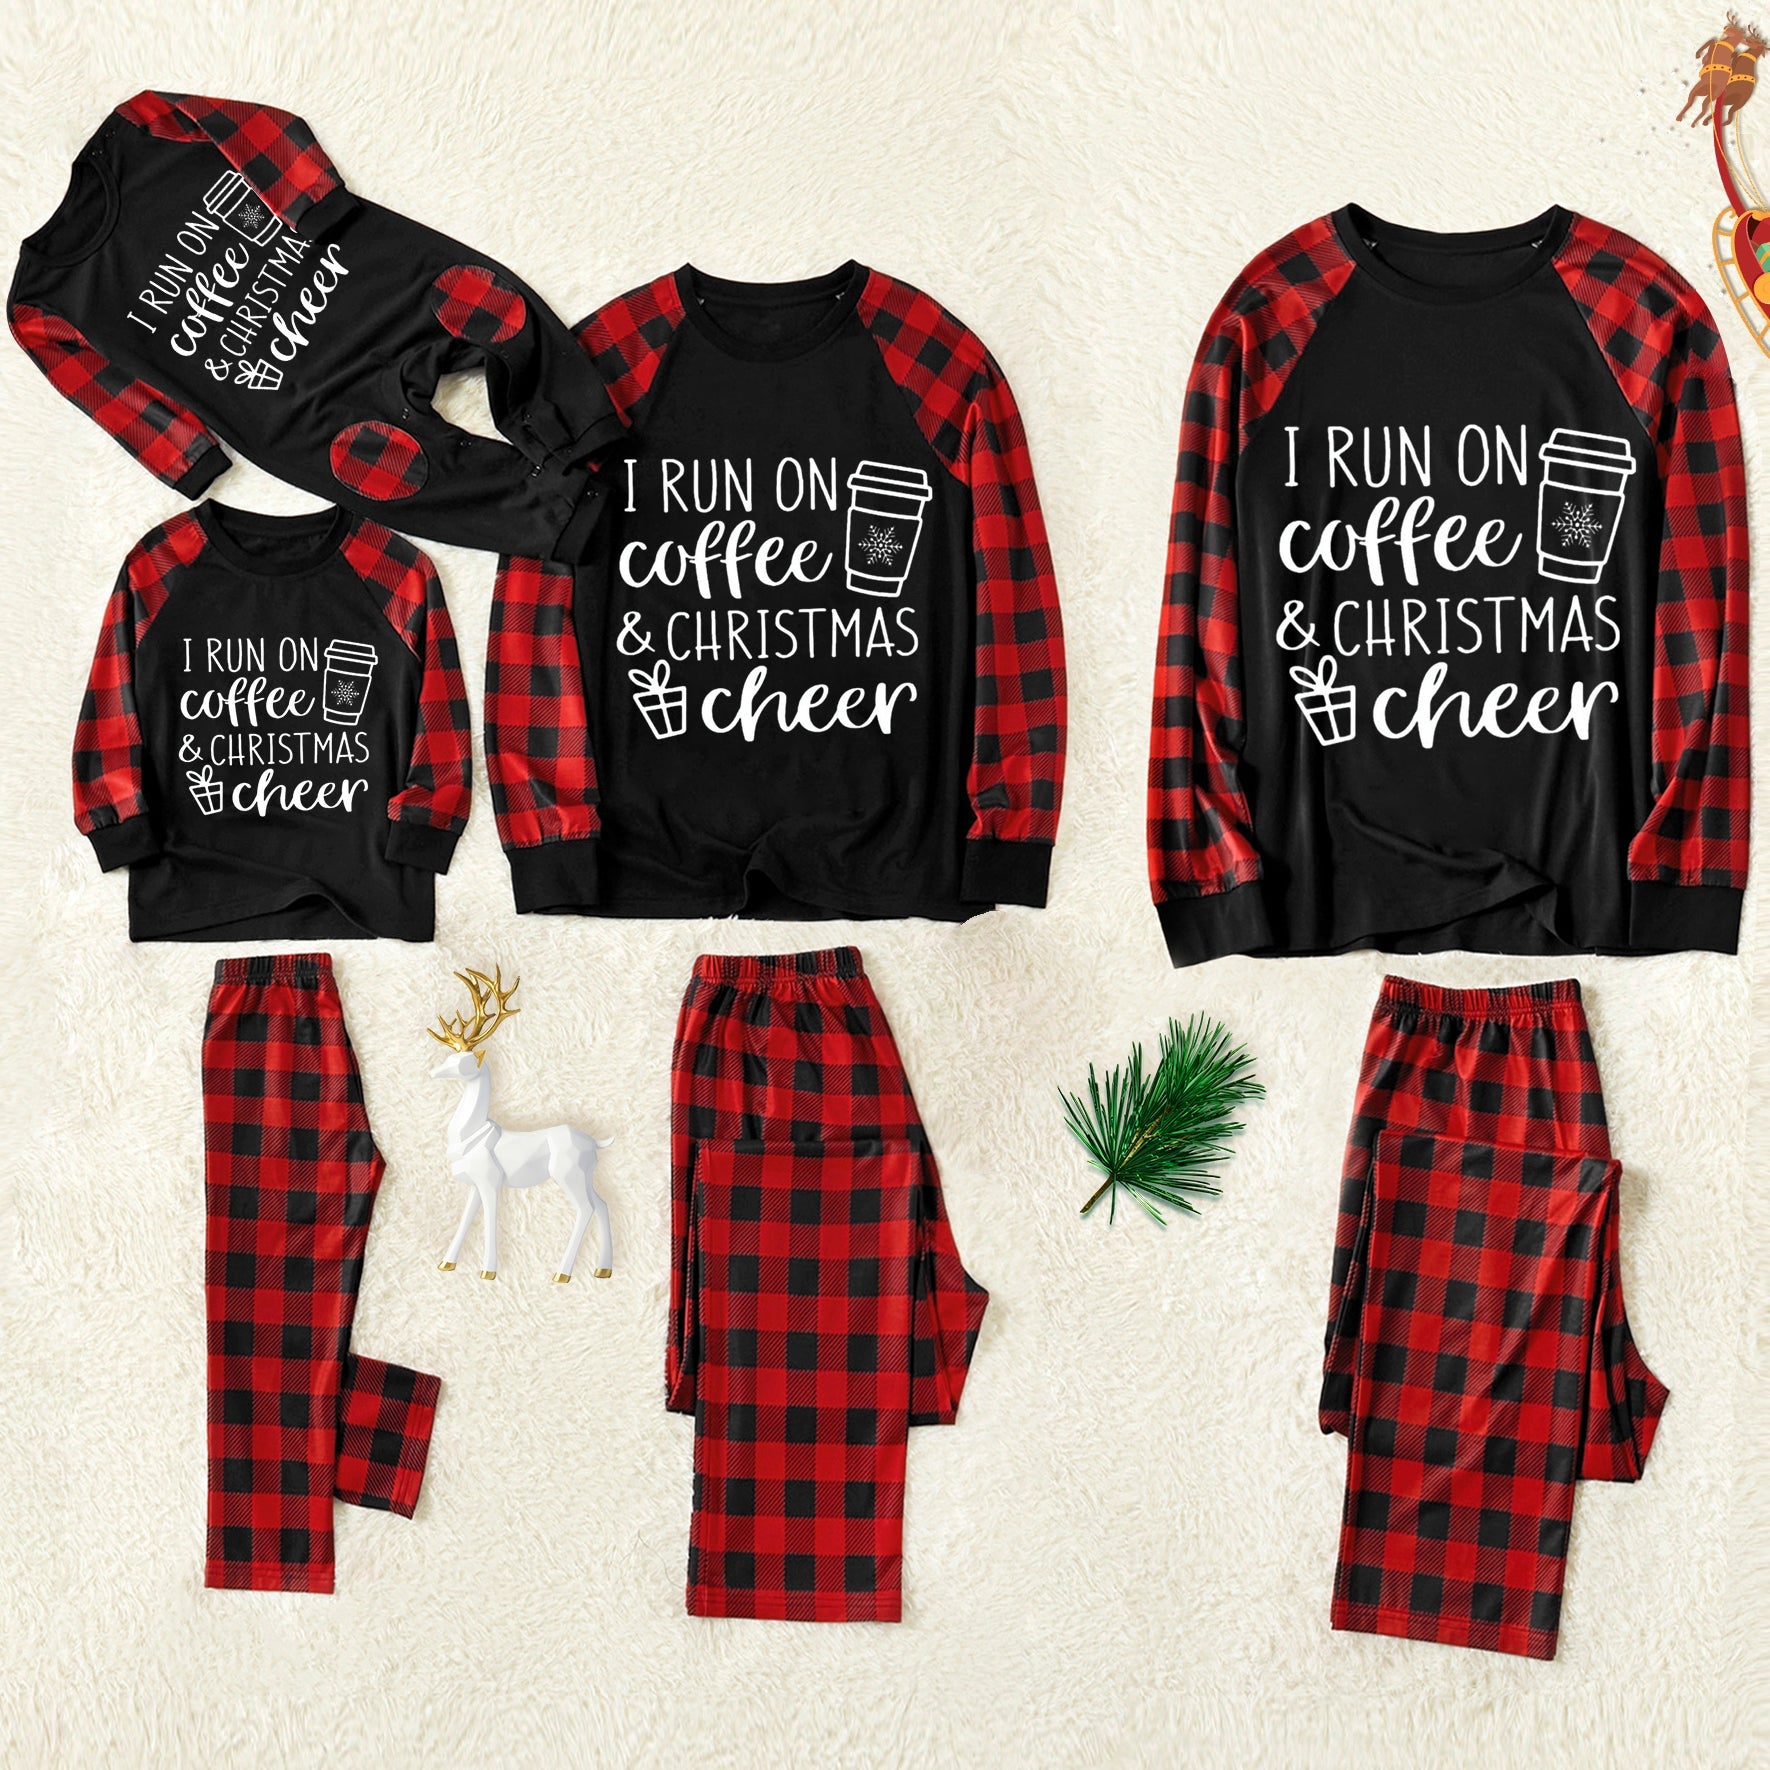 'I Run on Coffee & Christmas Cheer' Letter Print Coffee cup & Gift Patterned  Contrast Black top and Black & Red Plaid Pants Family Matching Pajamas Set With Dog Bandana